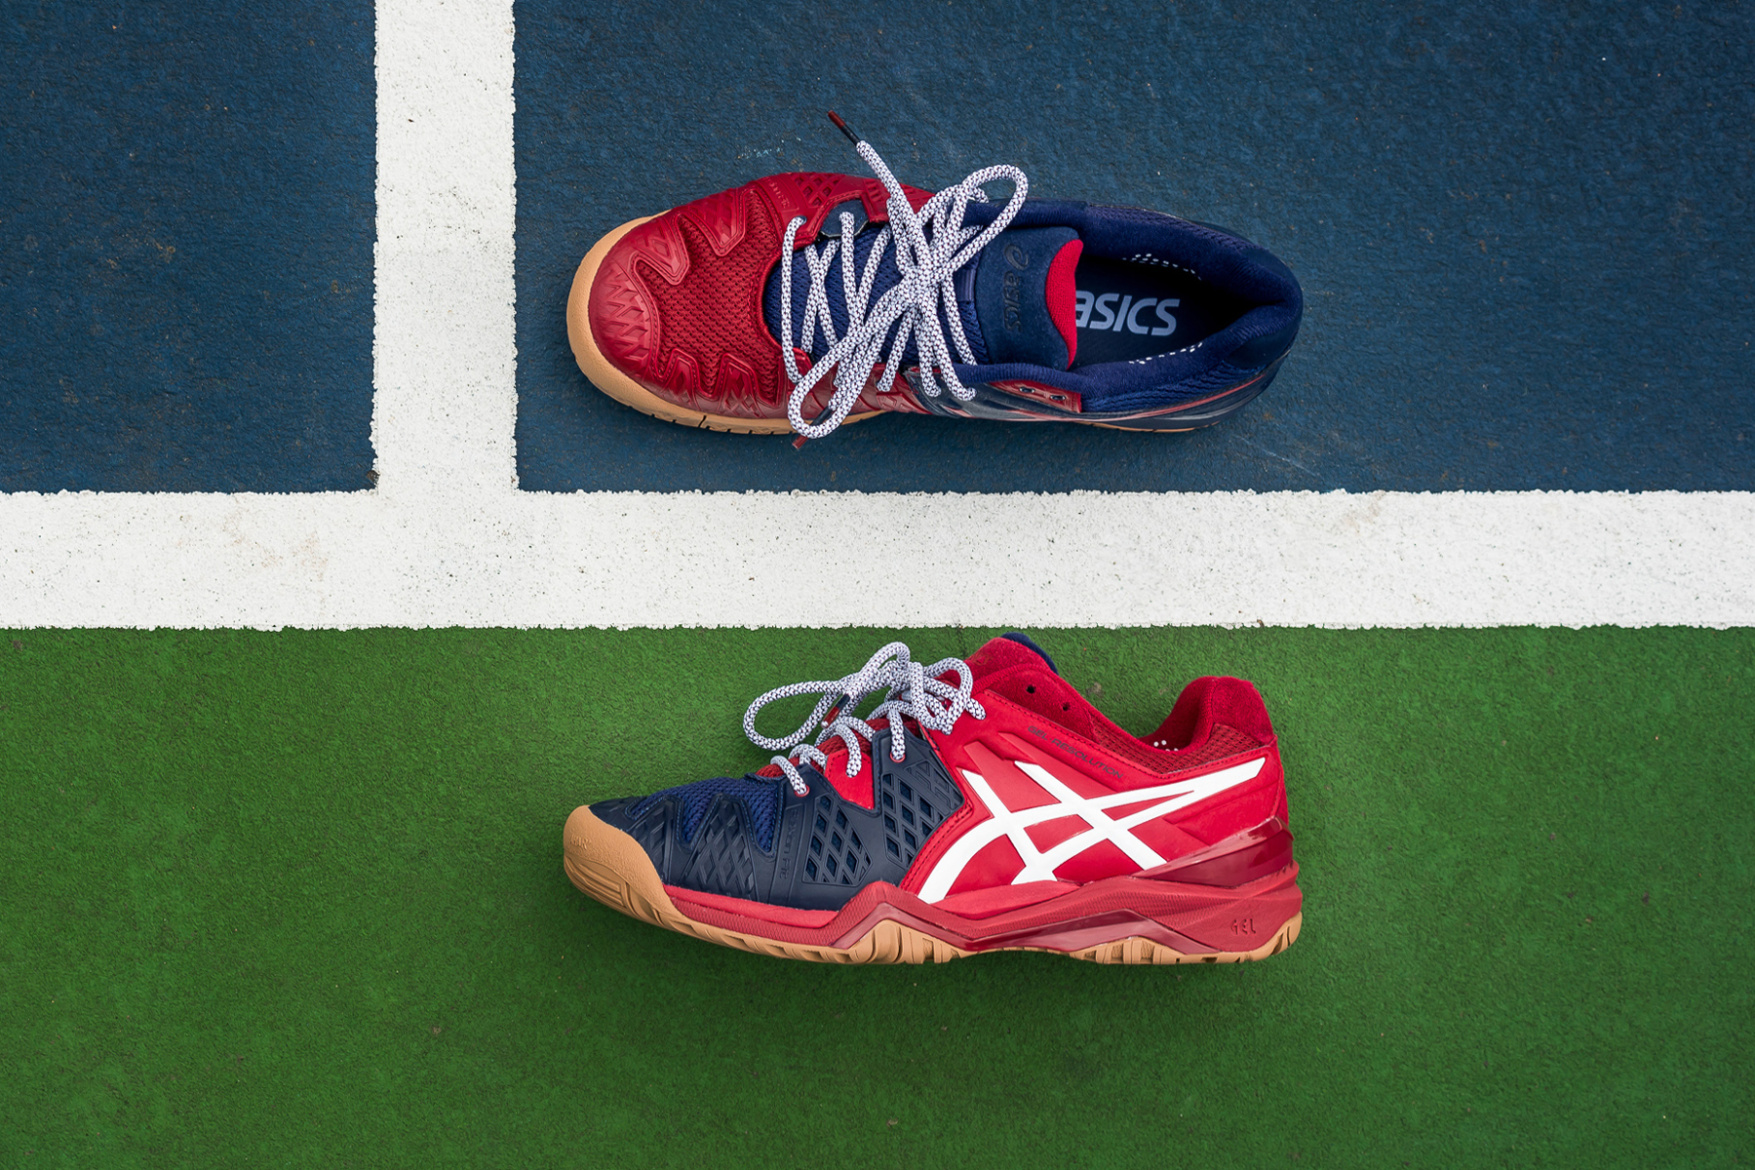 parker-shoes-asics-game-set-match-tennis-sneaker-collection-5